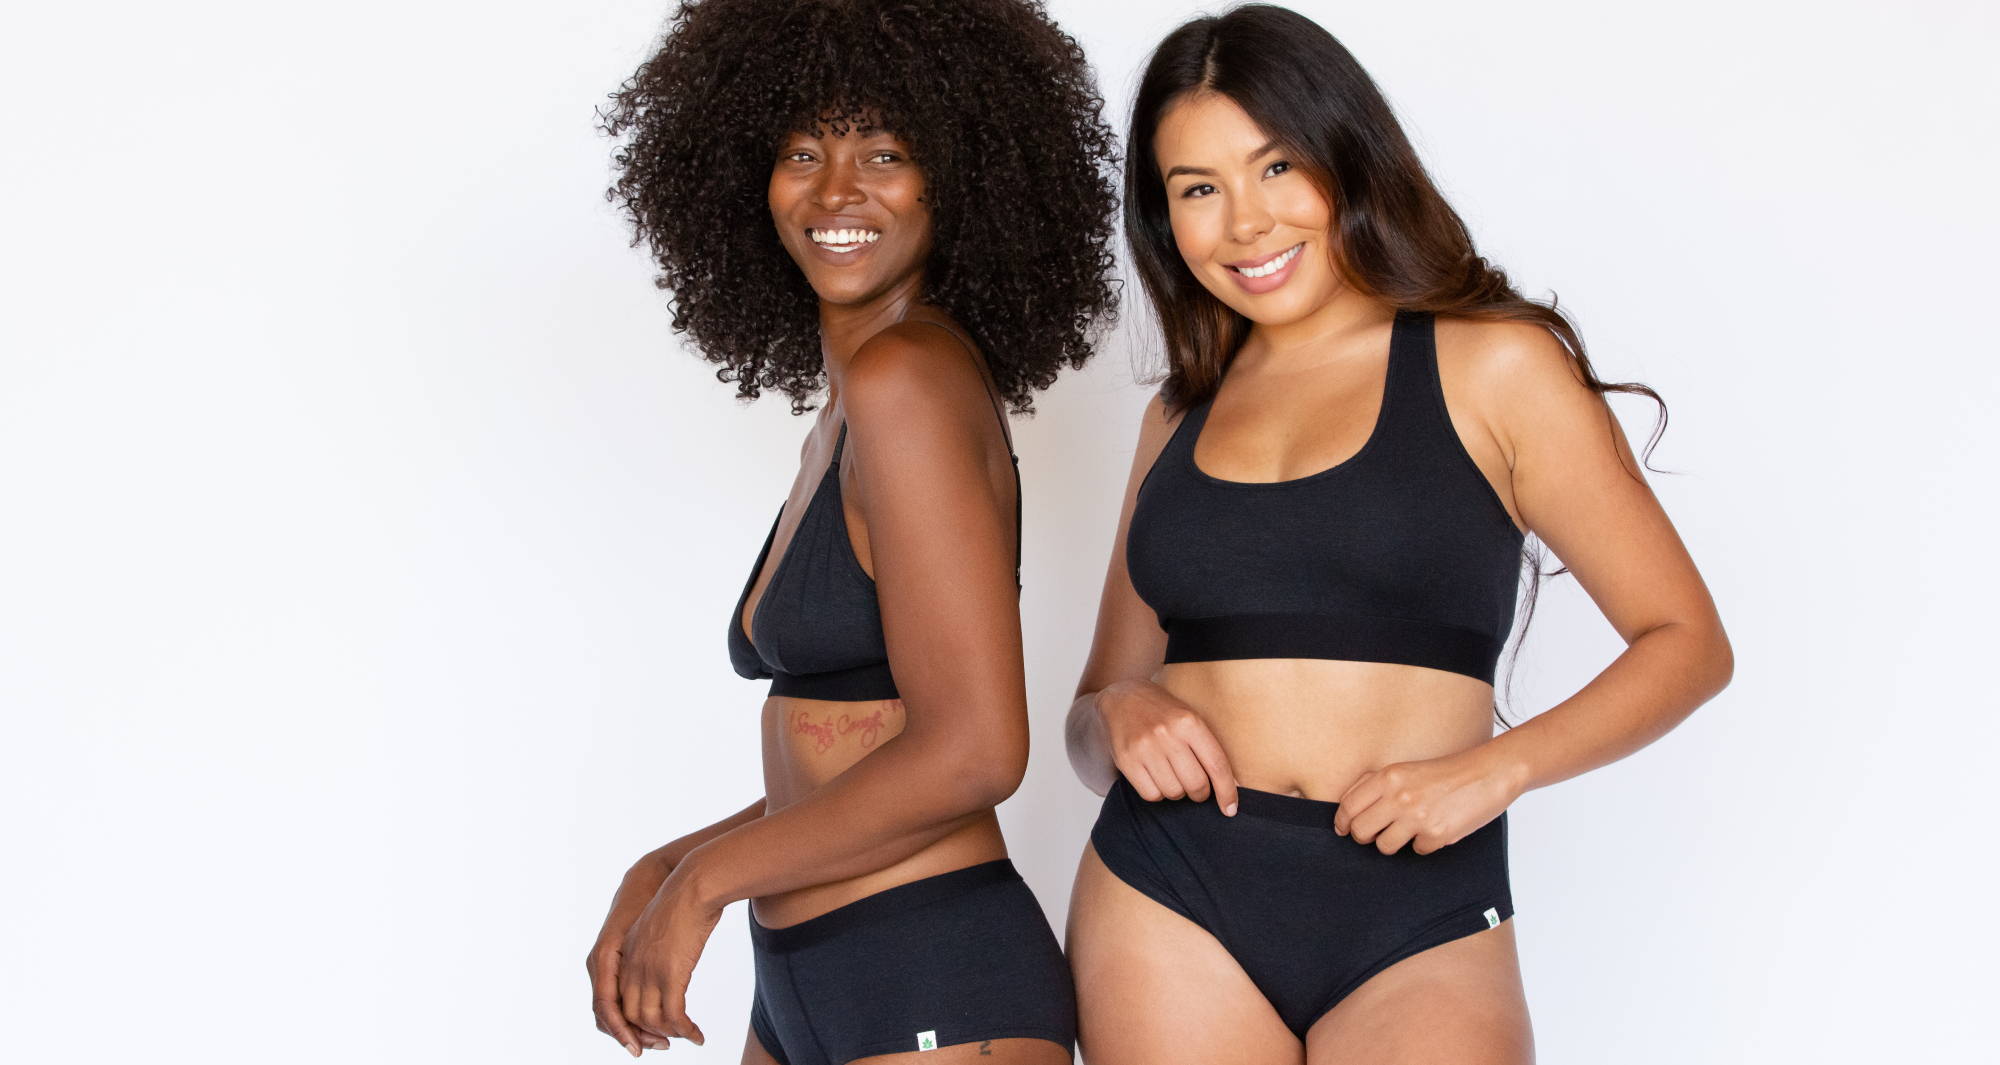 Two diverse women with dark hair model black underwear from WAMA, against a white background.